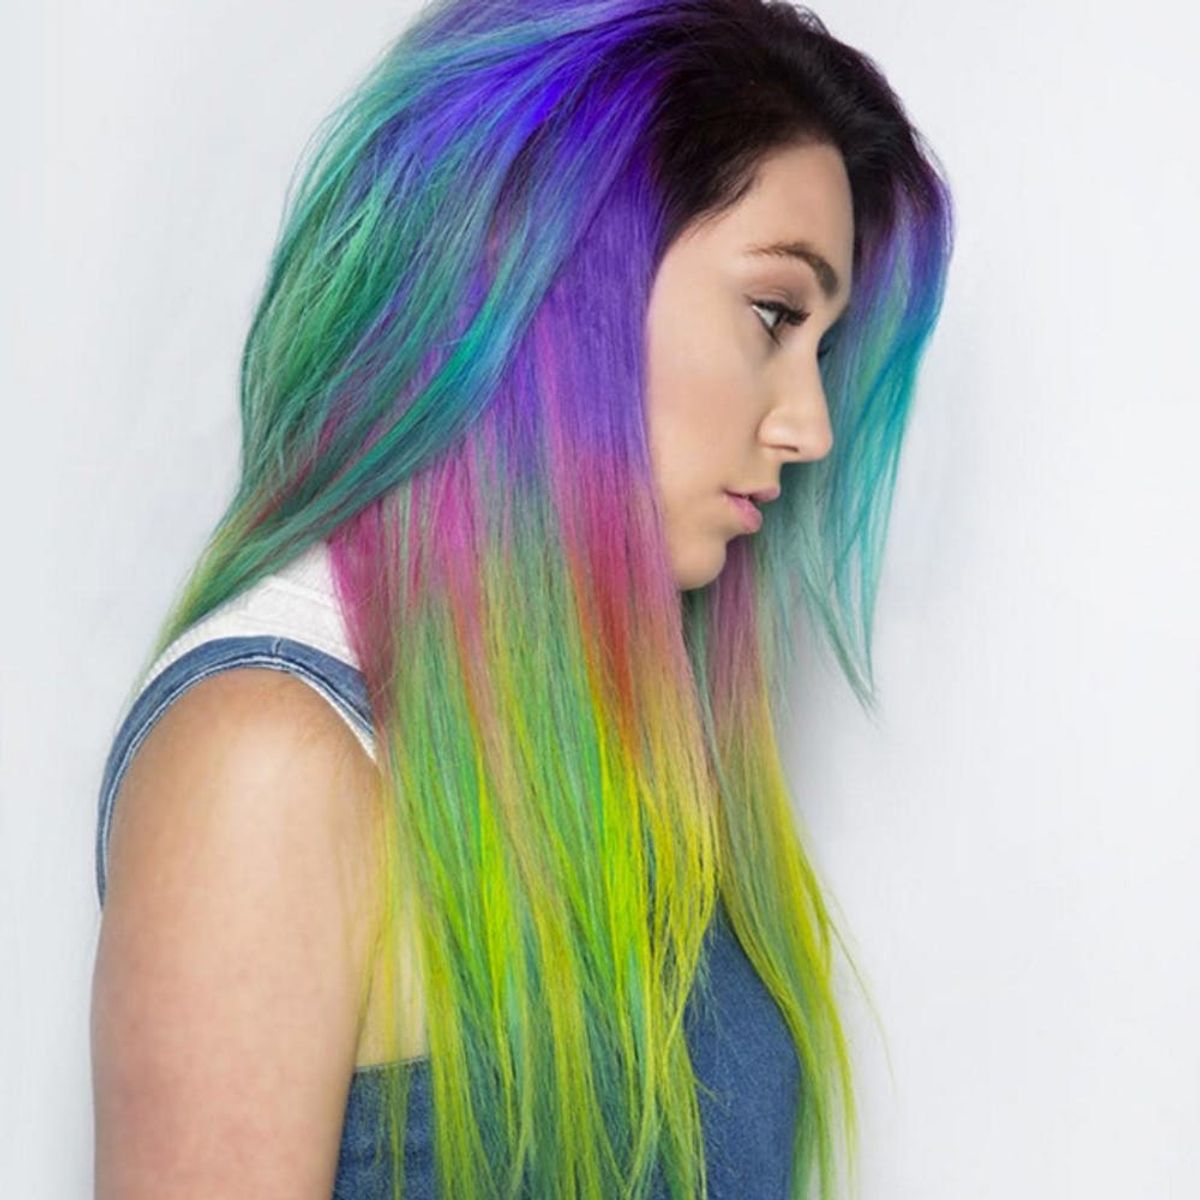 Hypercolor Hair Is the Latest in Rainbow Hair — And It’s Gorgeous